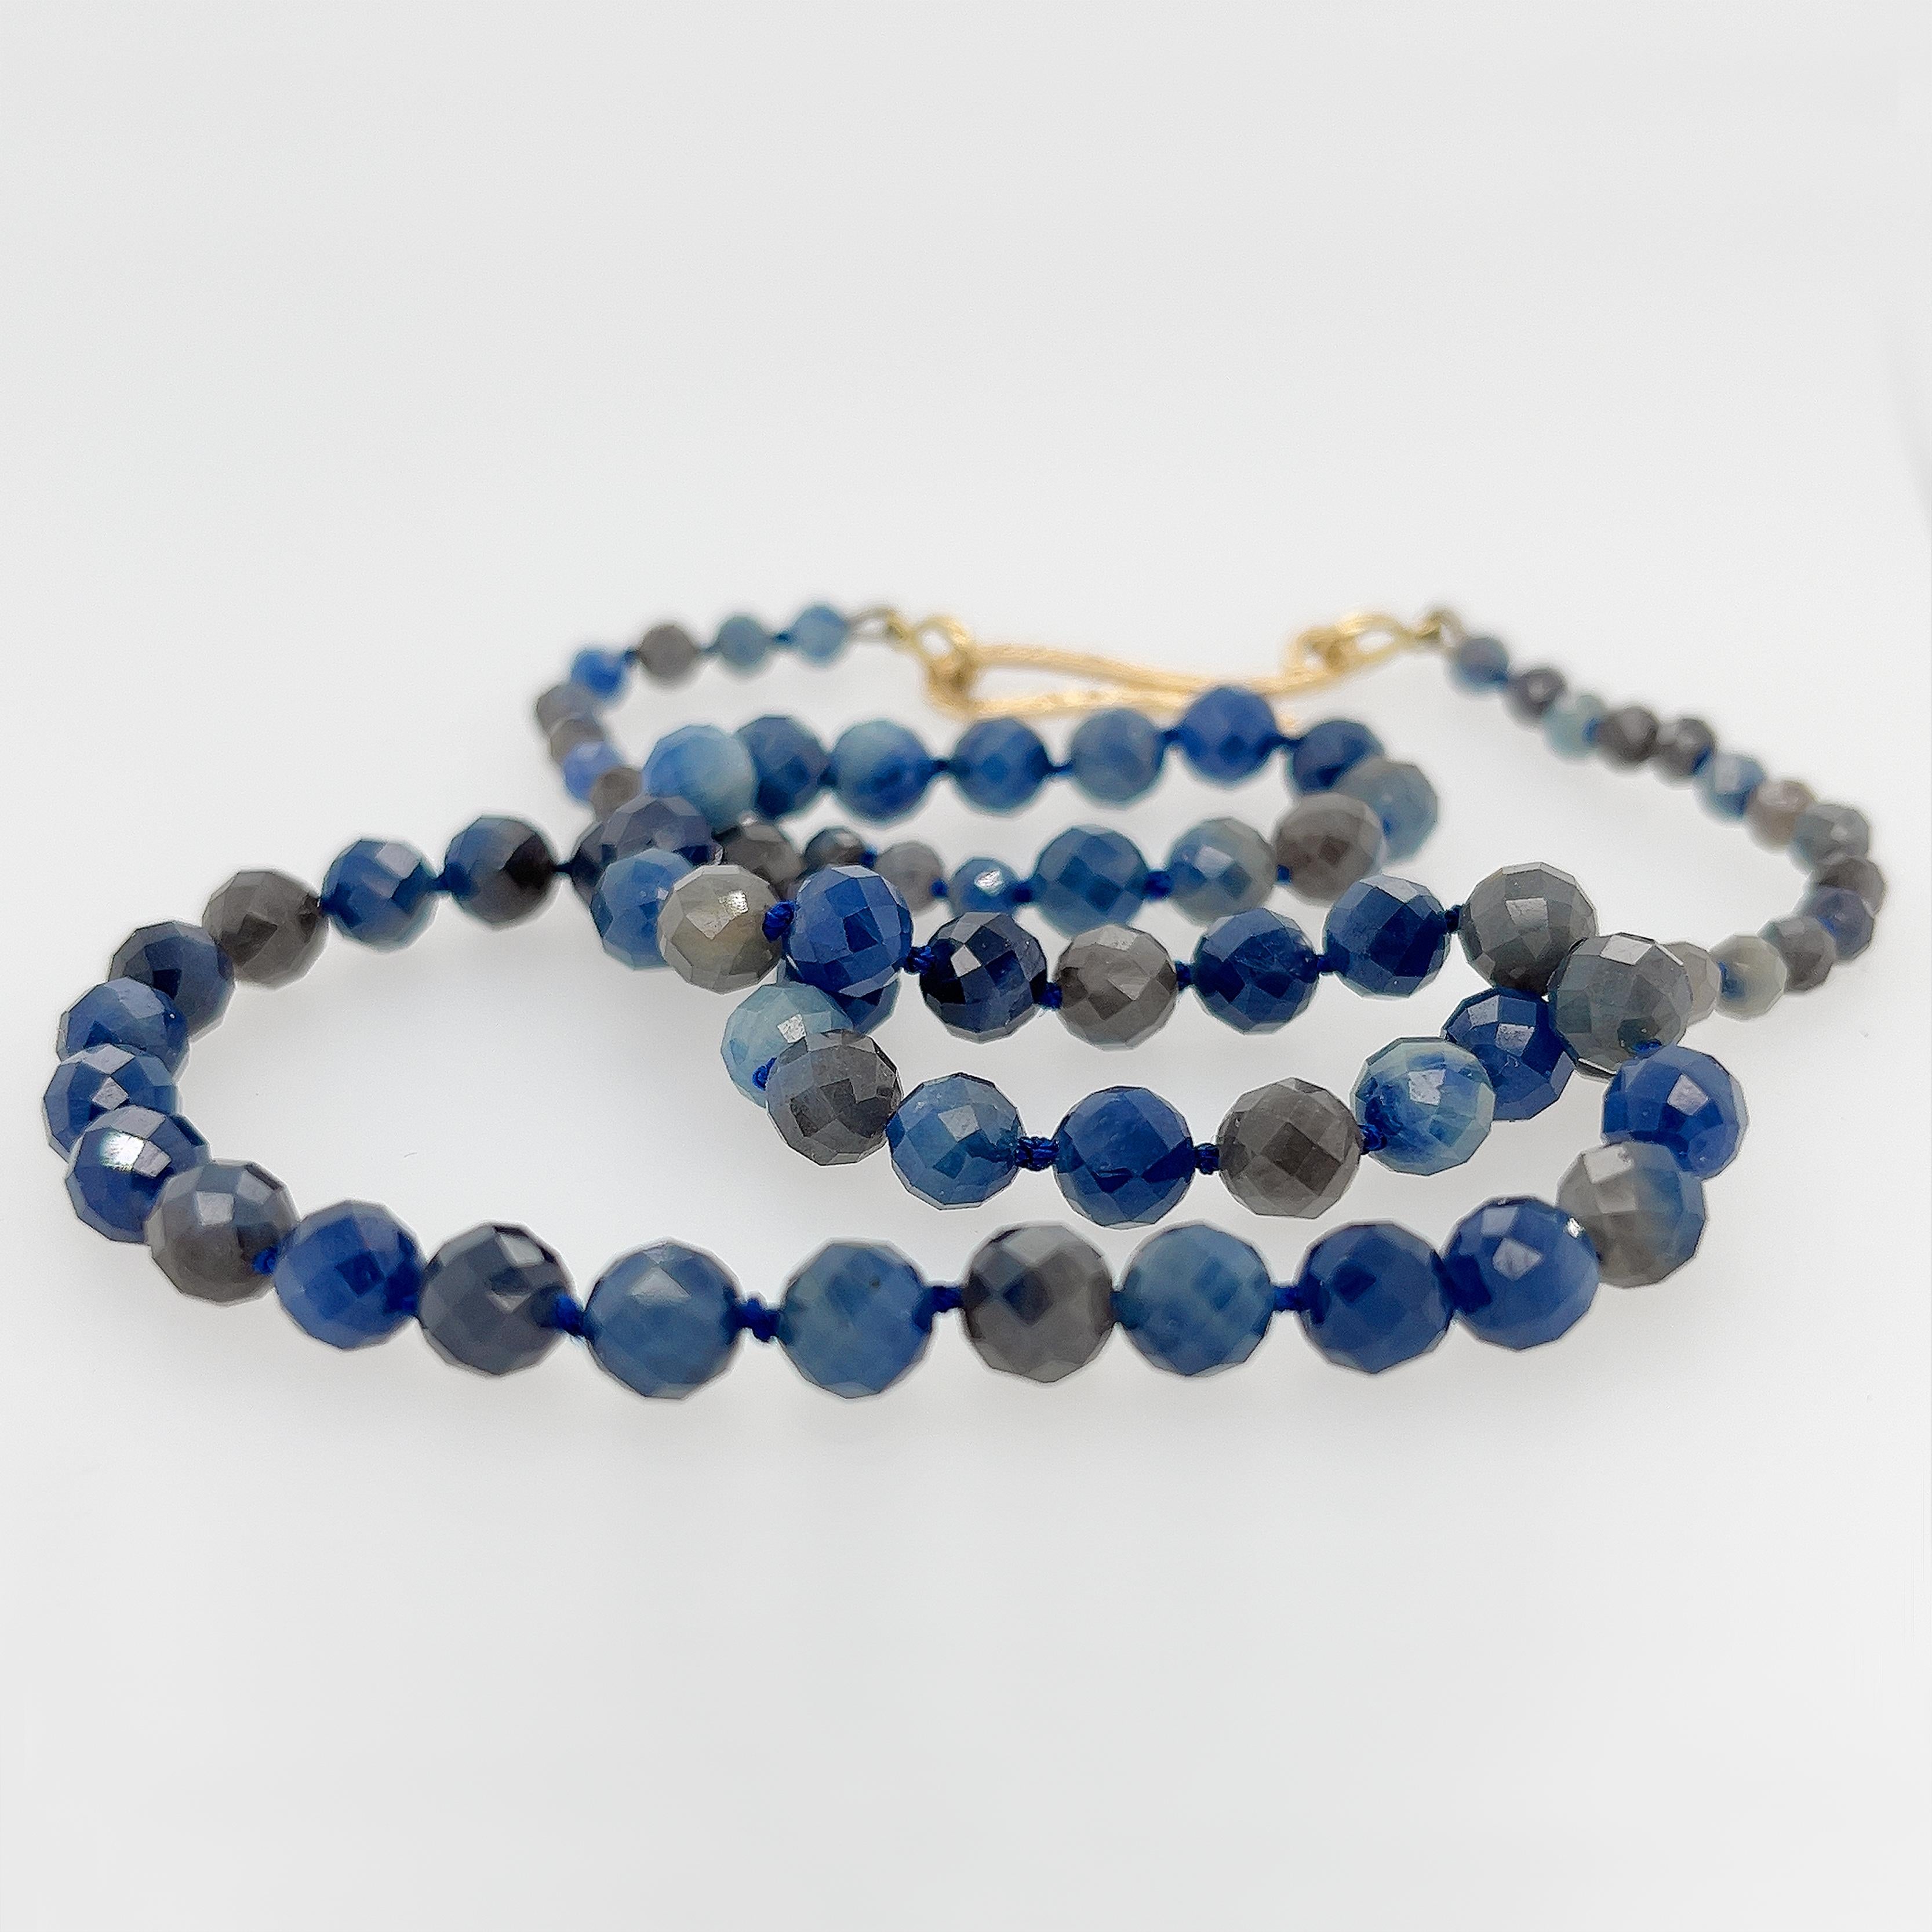 Every time you turn while wearing this one-of-a-kind Faceted Sapphire, Silk and 18kt Yellow Gold Necklace, the sapphires sparkle brightly.
The untreated and undyed sapphire beads are all different shades and hews of luscious blues into blue-grays